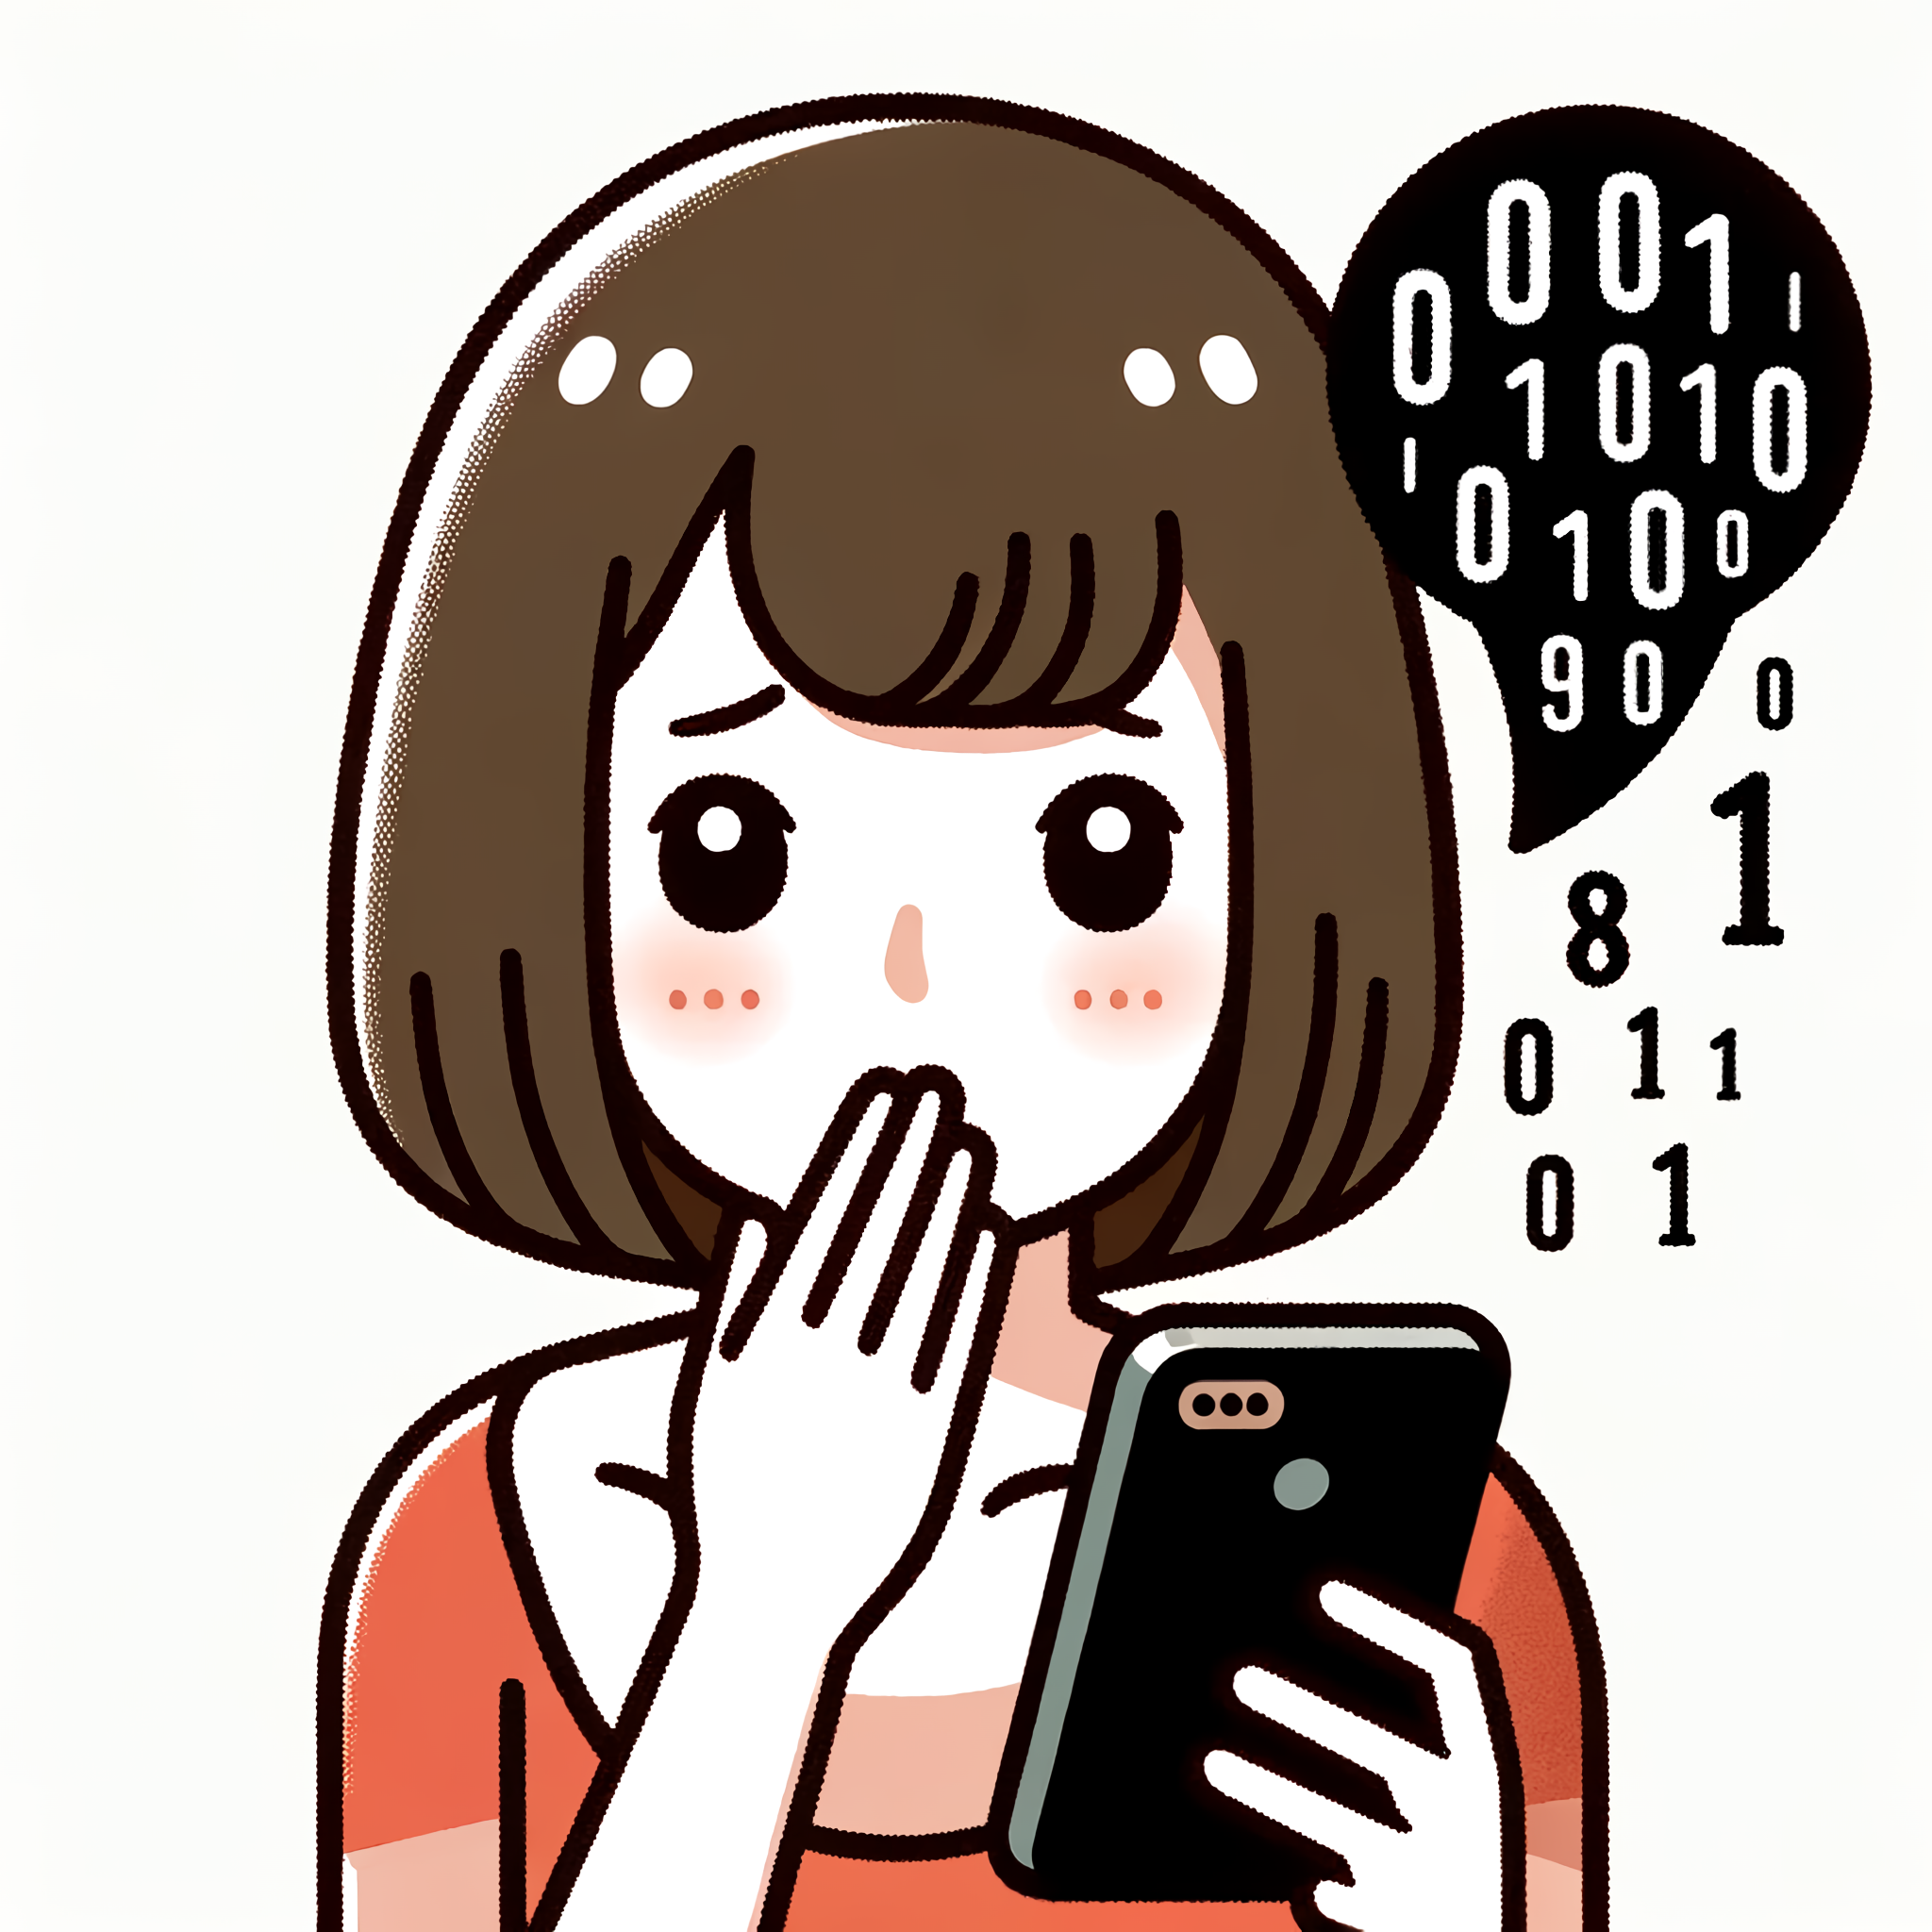 A simple, public-friendly illustration showing a woman with bob hair looking worried as information leaks from her smartphone. The smartphone displays visible data symbols, like ones and zeros, floating away. The woman has a concerned expression and is holding her hand to her mouth. She has a stylish bob haircut. The background is plain to maintain focus on the subject. The illustration is designed in a very simple and cartoonish style, with bright, but not overwhelming, colors, ideal for public information materials.